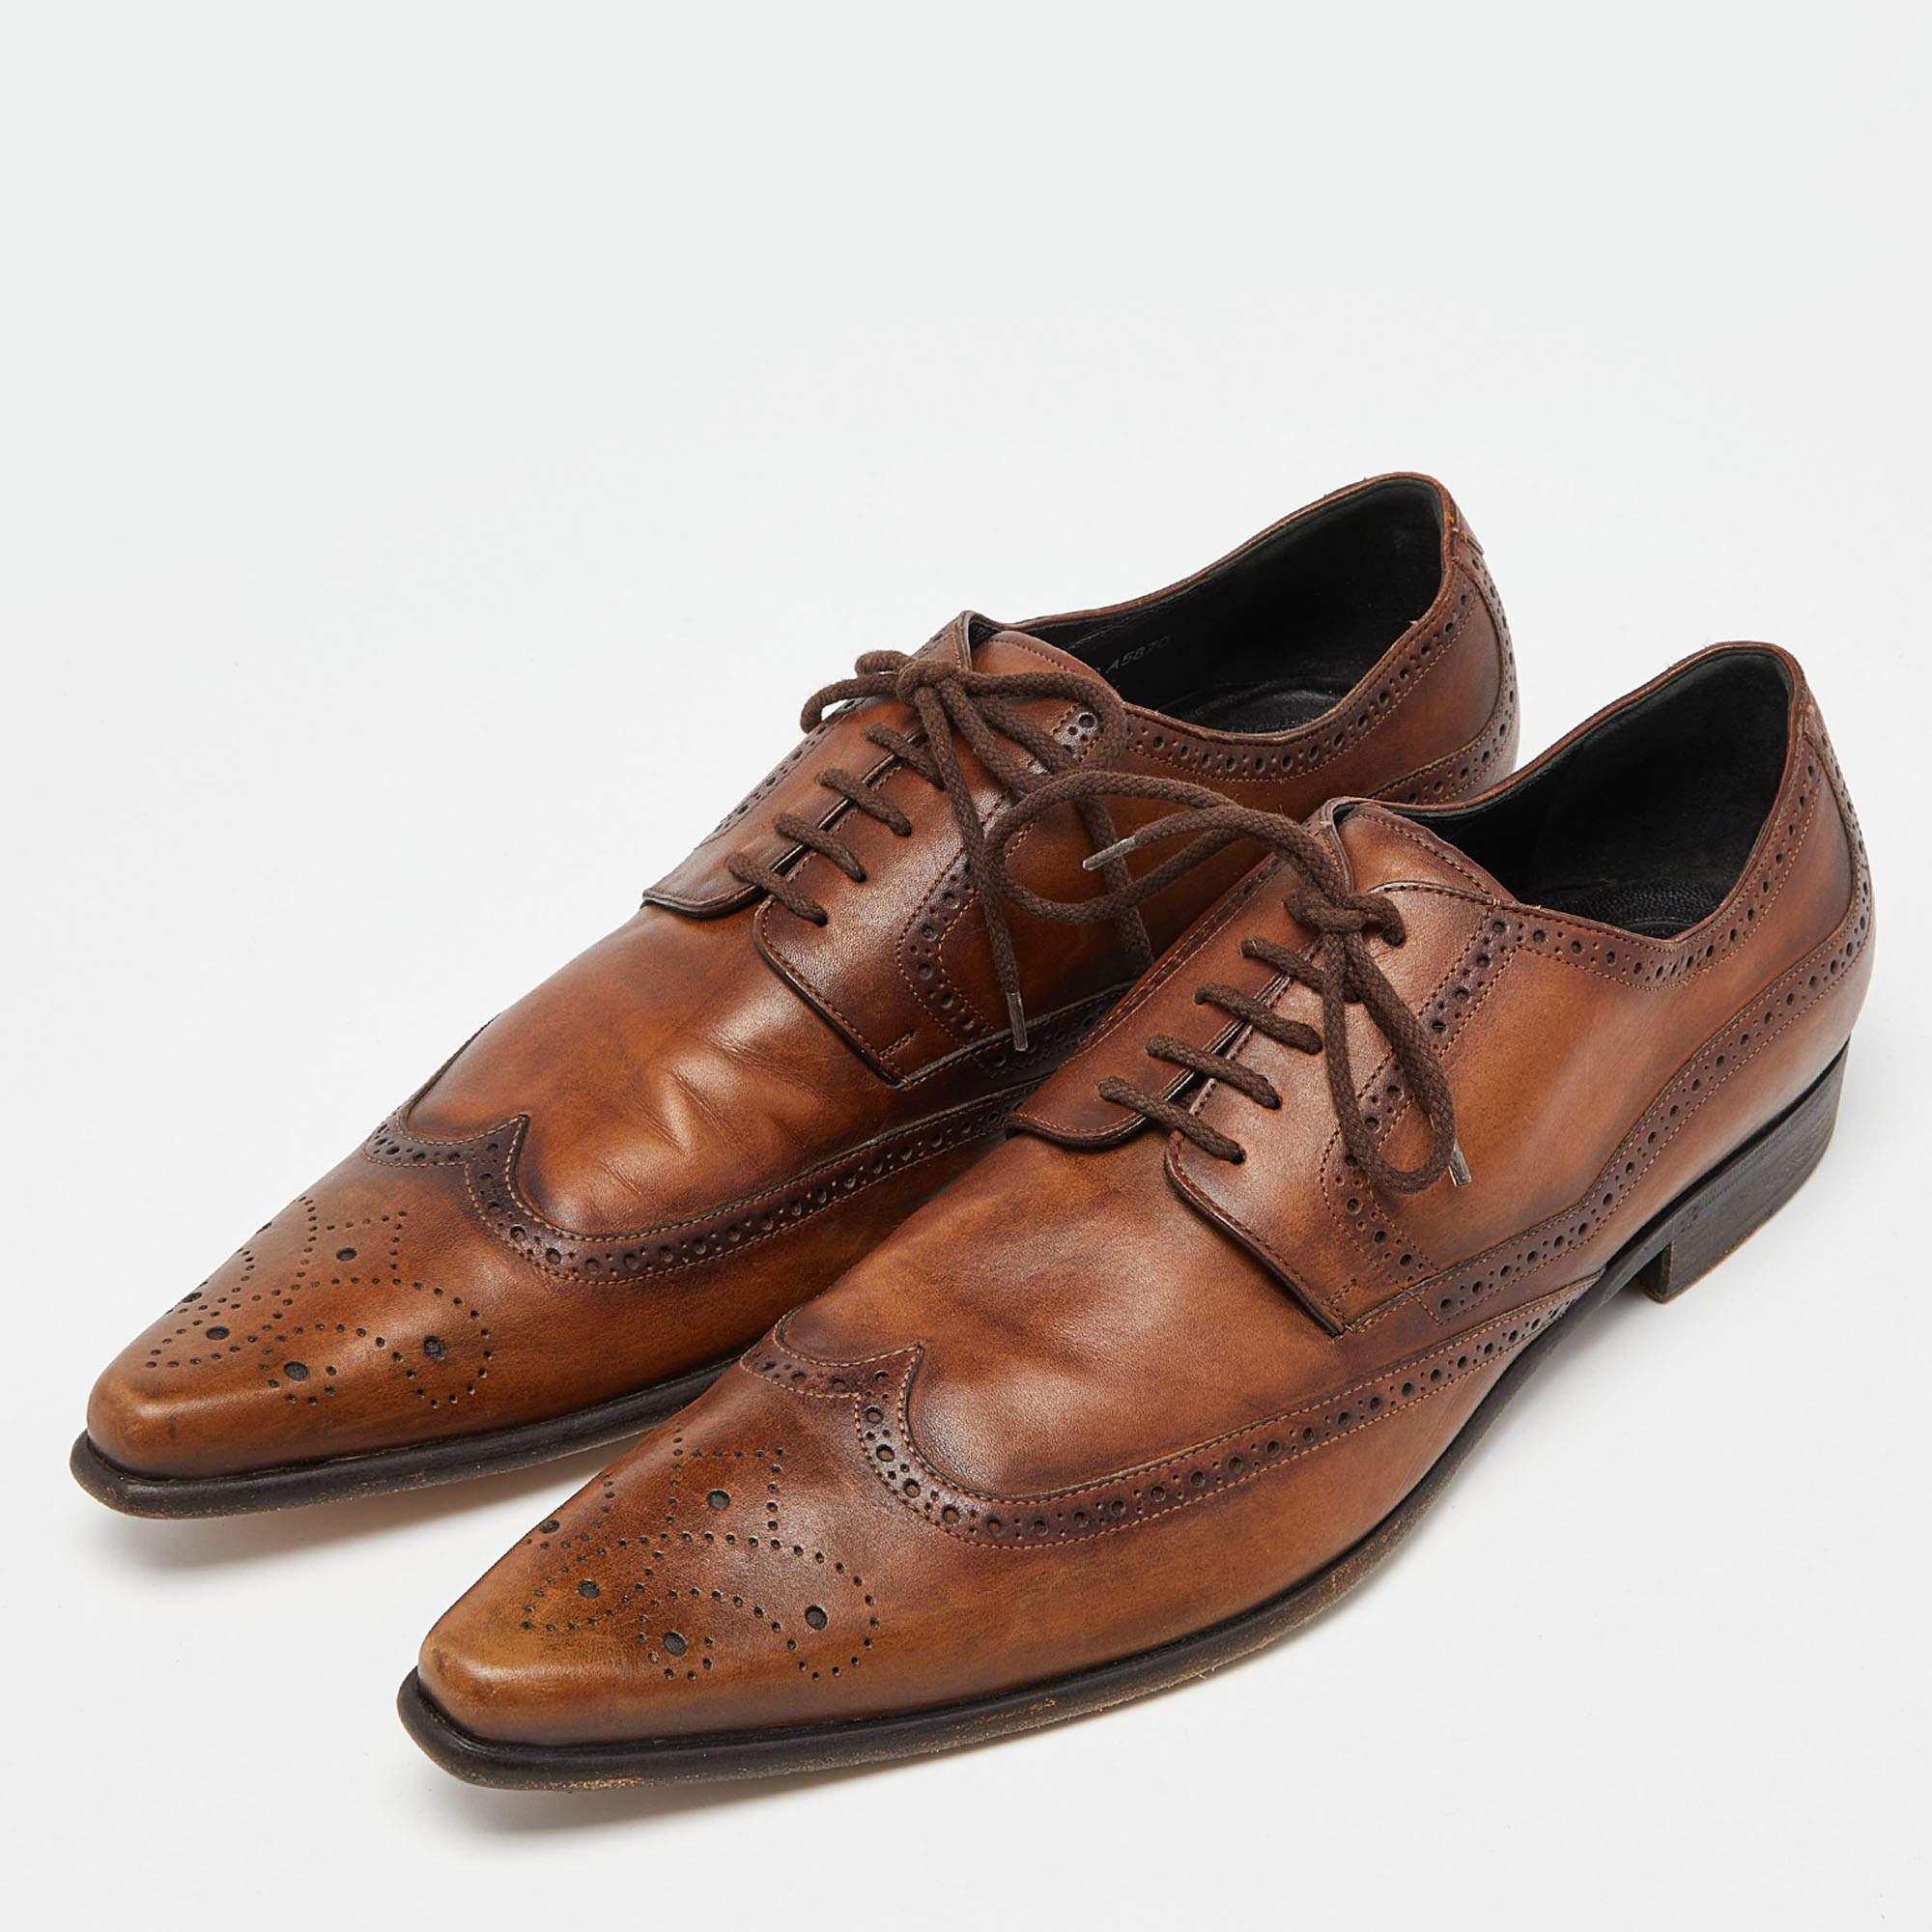 Give your outfit a luxe update with this pair of Dolce & Gabbana oxfords. The shoes are sewn perfectly to help you make a statement in them for a long time.

